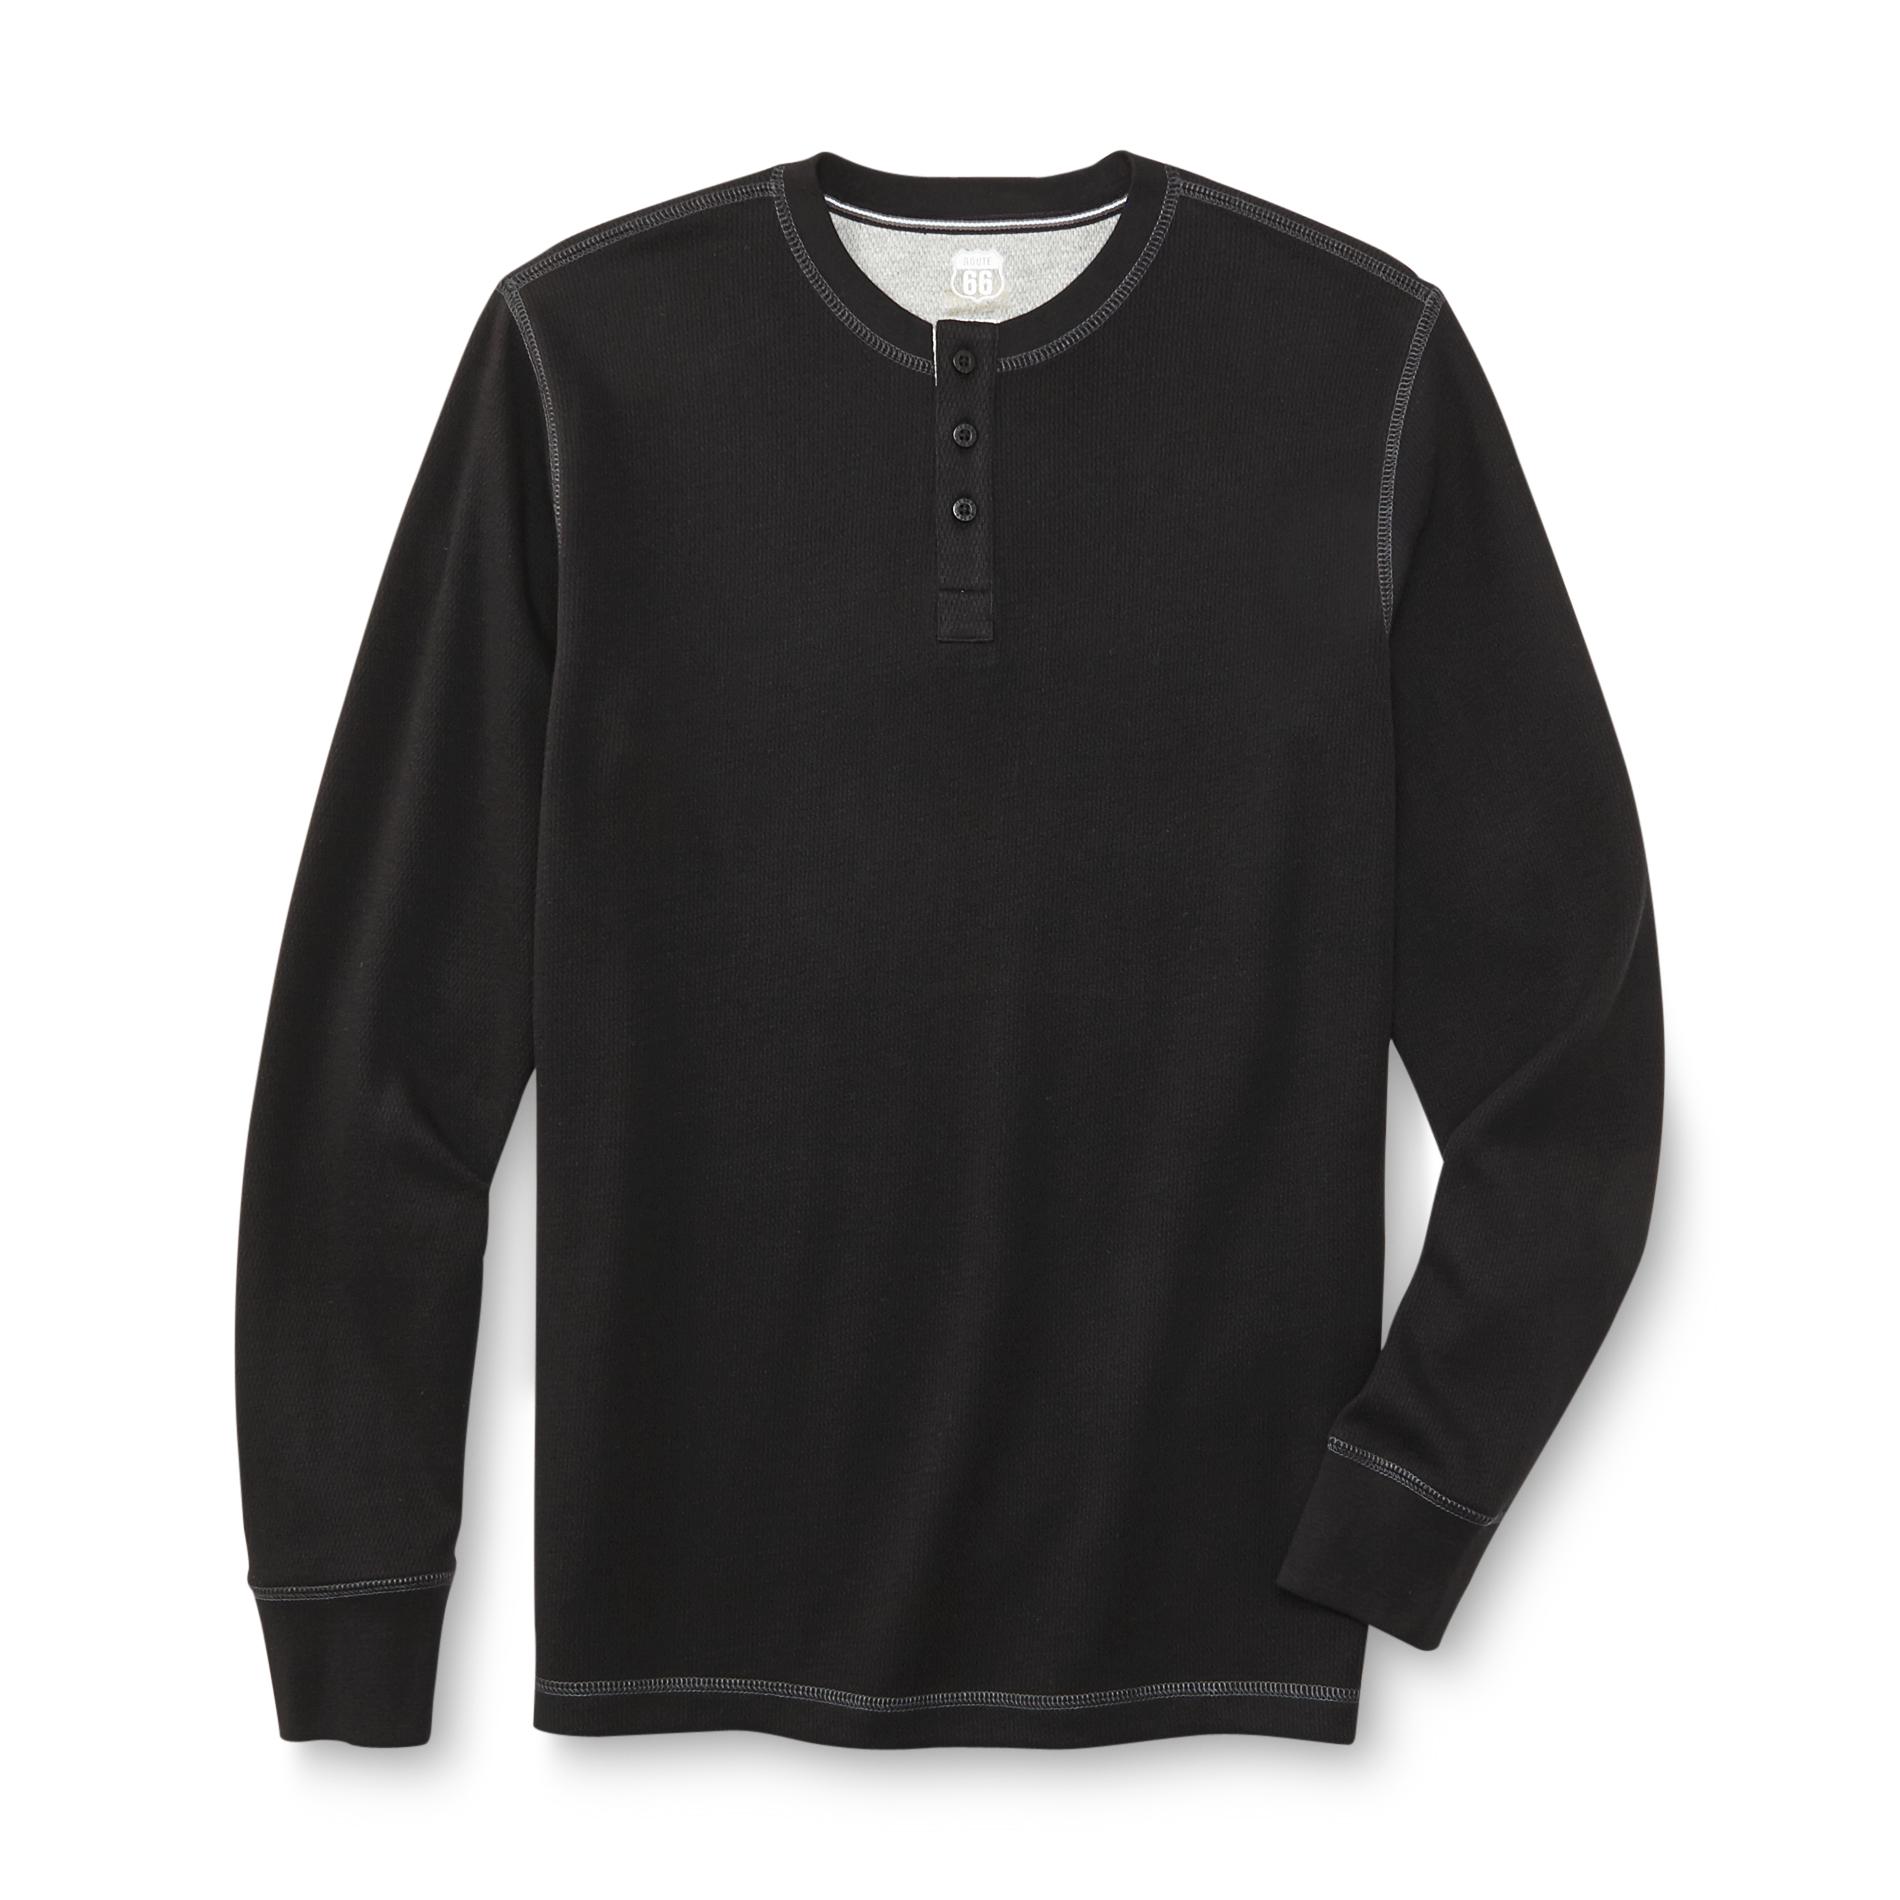 Route 66 Men's Thermal Henley Shirt